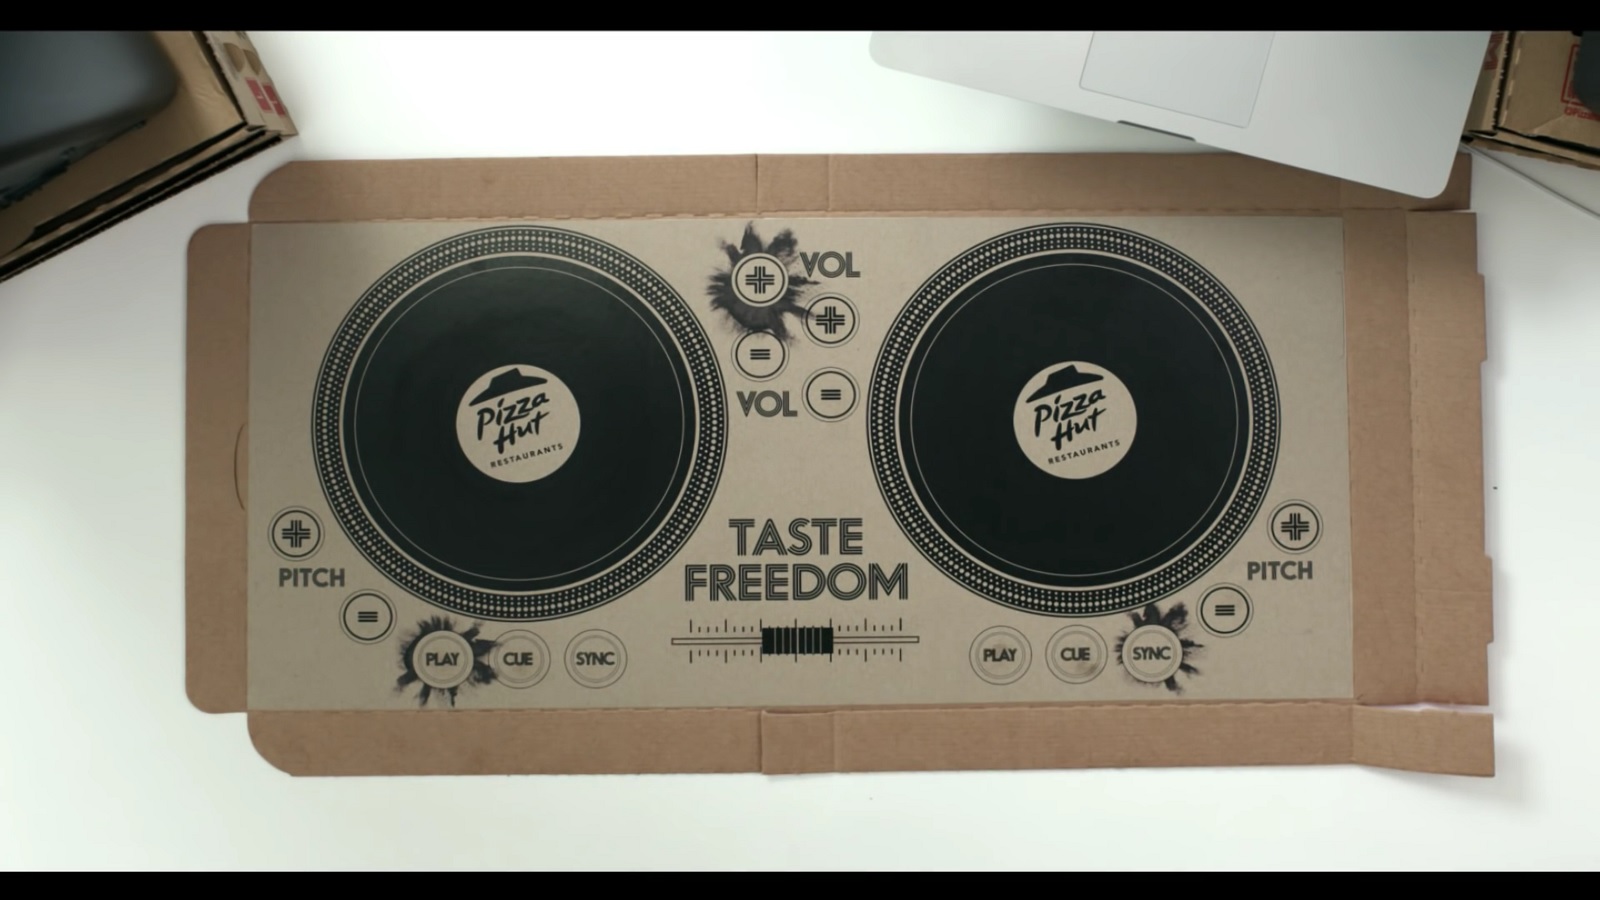 Turn Your Pizza to a Digital DJing Controller